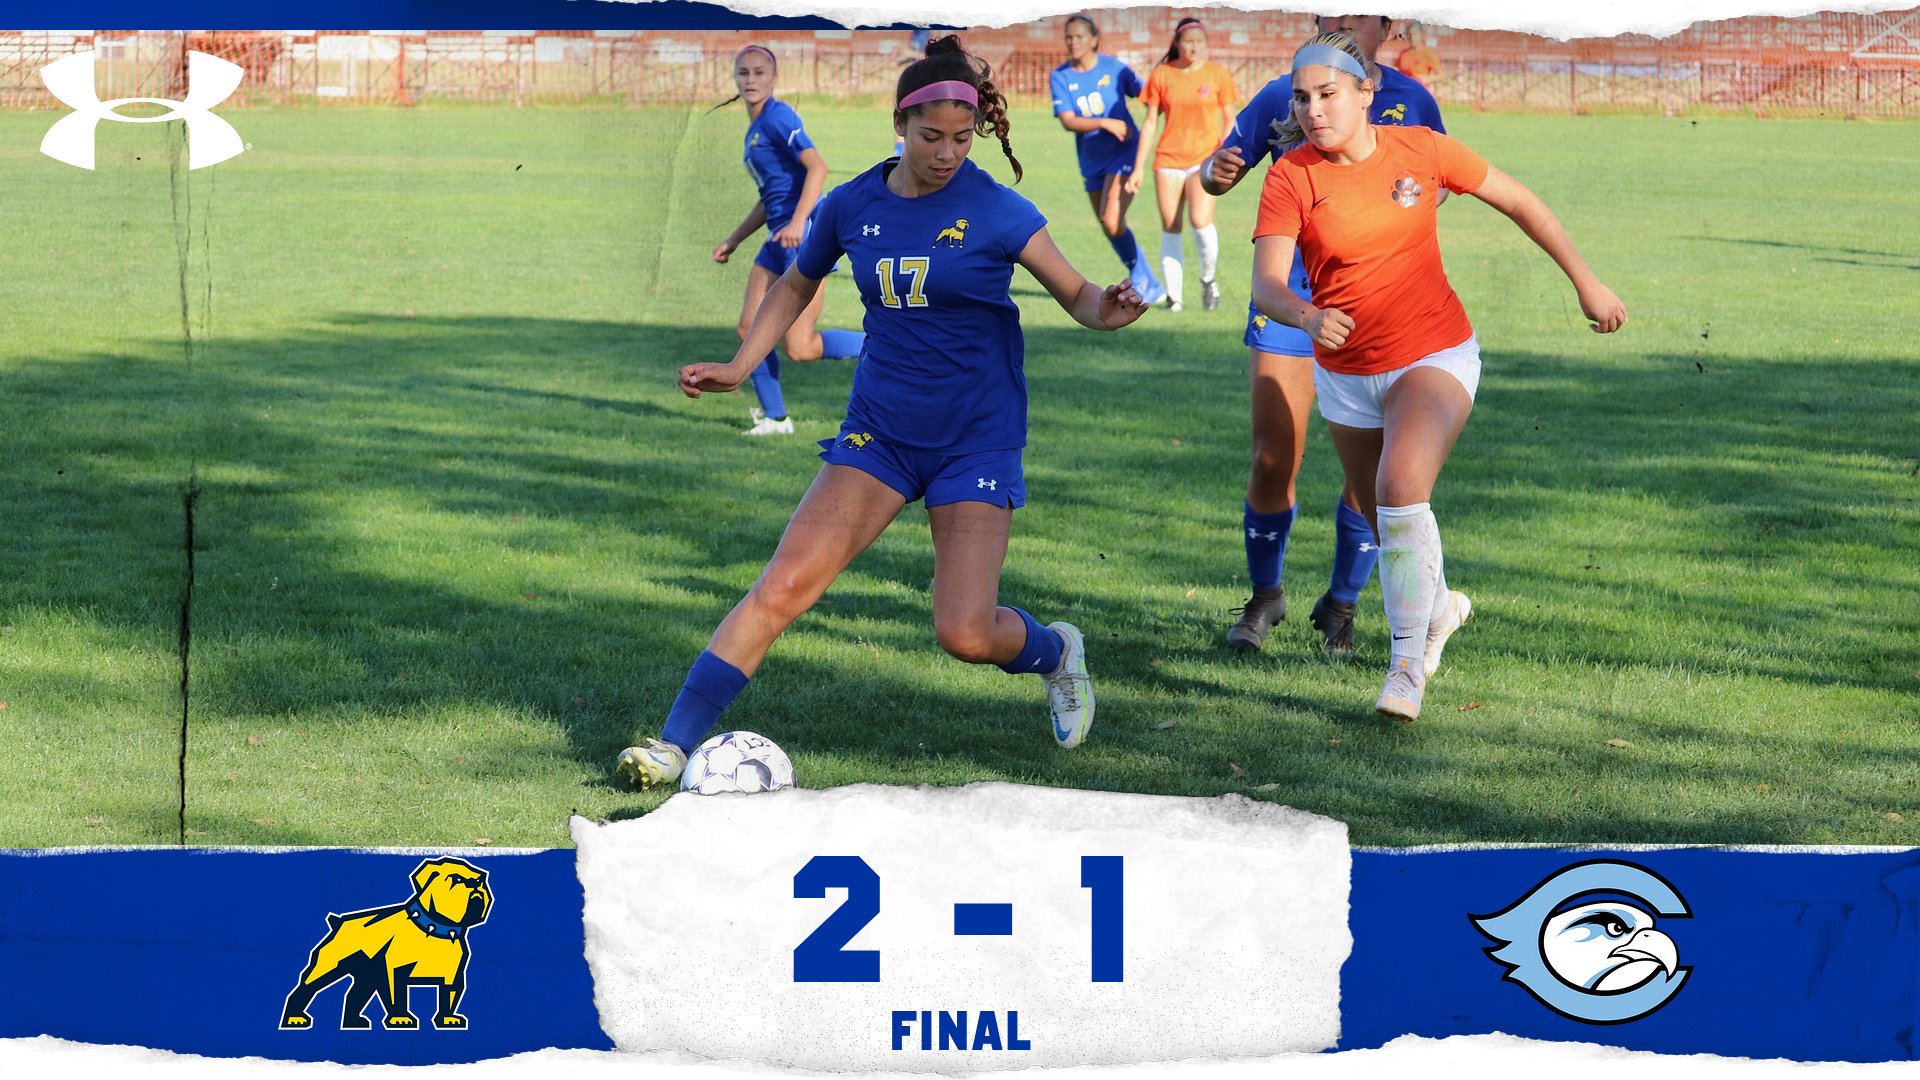 Women's Soccer: Ramirez Duo Connects Twice in Win at Cabrillo